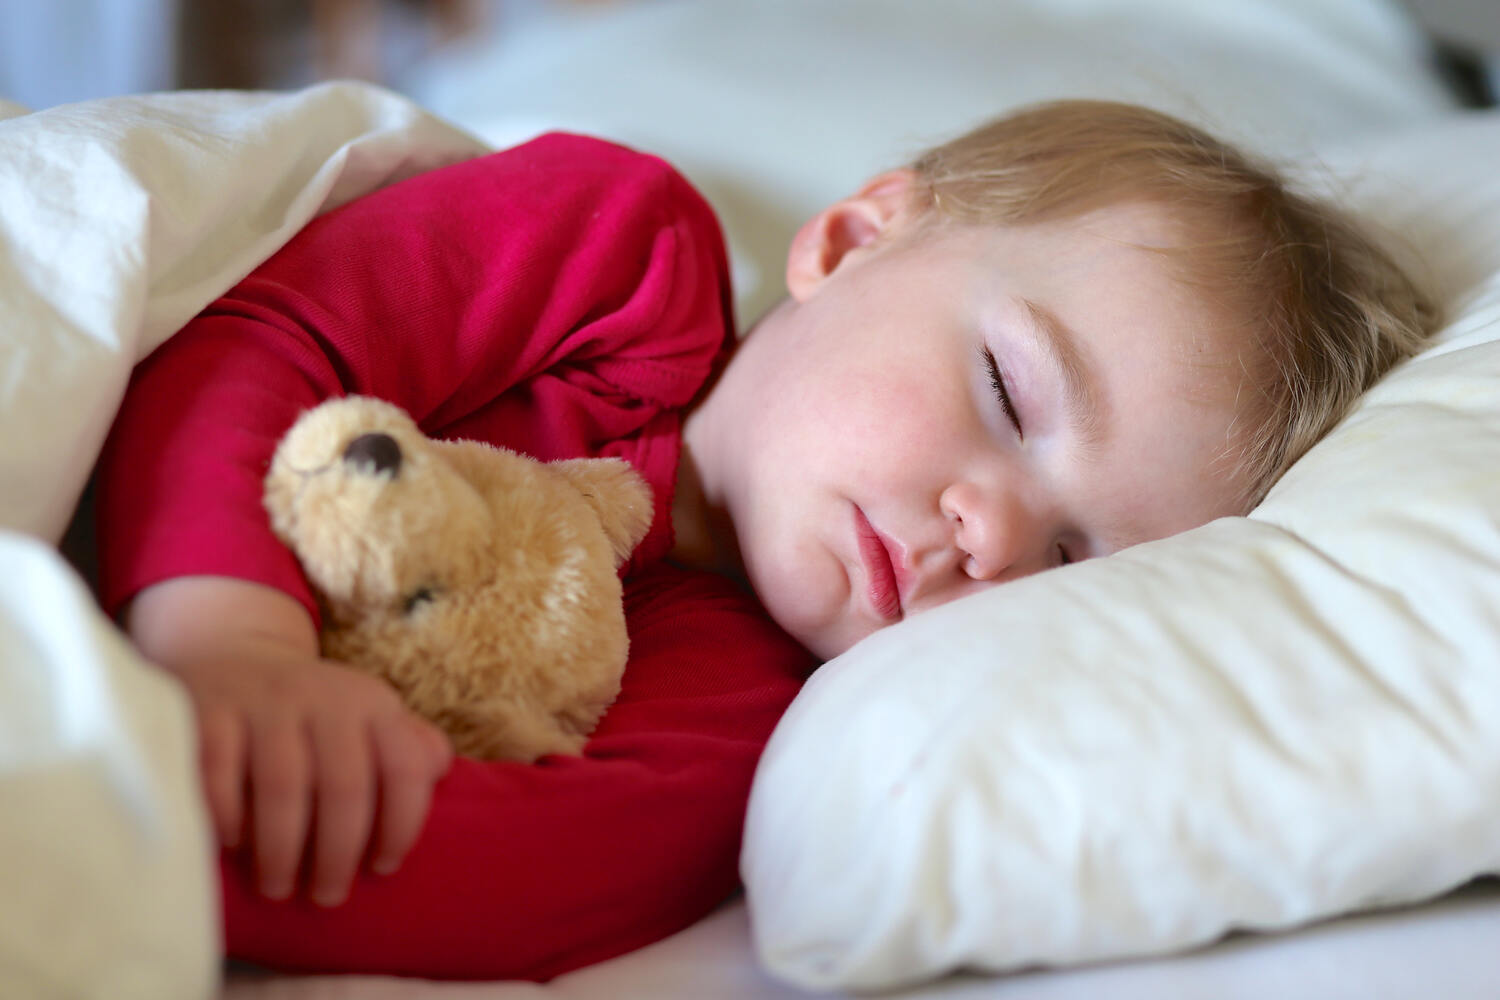 Omega-3 fatty acids helps toddlers sleep better